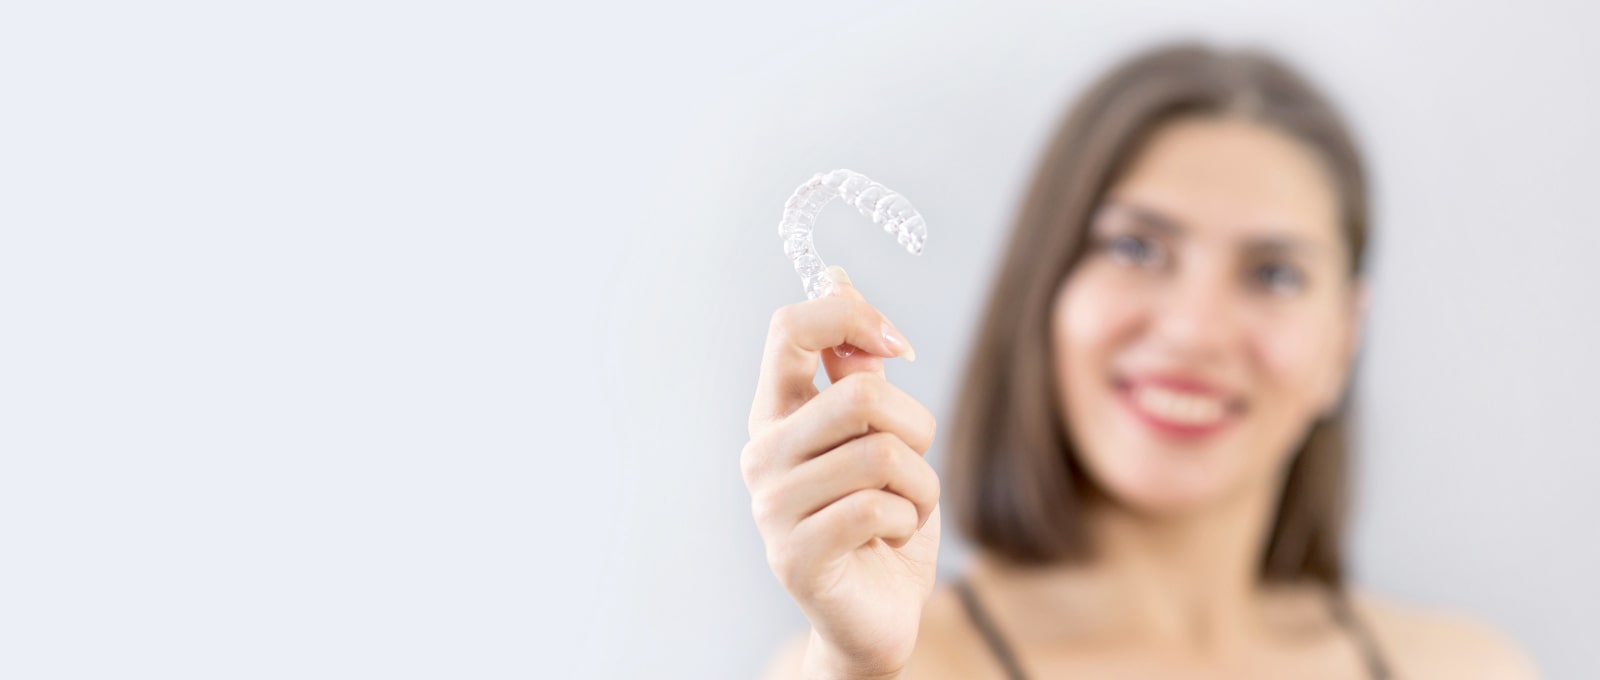 Invisalign Treatment ;Transform your smile with Invisalign - clear, comfortable, confident.